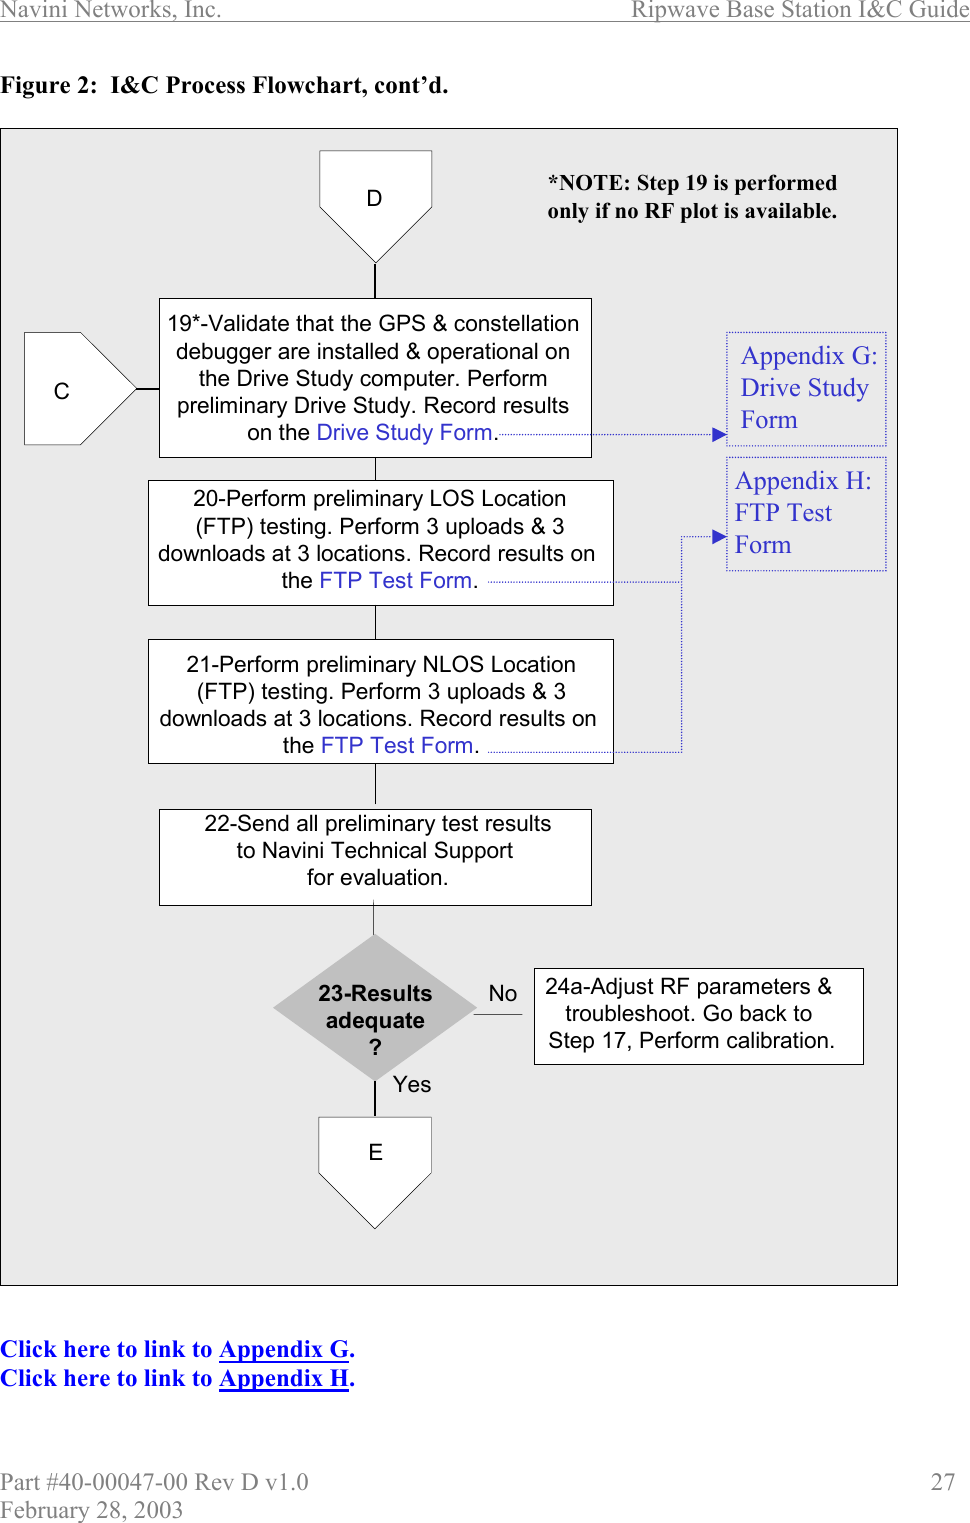 Navini Networks, Inc.                          Ripwave Base Station I&amp;C Guide Part #40-00047-00 Rev D v1.0                     27 February 28, 2003 Figure 2:  I&amp;C Process Flowchart, cont’d.                                            Click here to link to Appendix G. Click here to link to Appendix H. 22-Send all preliminary test resultsto Navini Technical Support for evaluation.24a-Adjust RF parameters &amp; troubleshoot. Go back to Step 17, Perform calibration.NoYes19*-Validate that the GPS &amp; constellationdebugger are installed &amp; operational onthe Drive Study computer. Performpreliminary Drive Study. Record resultson the Drive Study Form.23-Resultsadequate?20-Perform preliminary LOS Location(FTP) testing. Perform 3 uploads &amp; 3downloads at 3 locations. Record results on the FTP Test Form.DCEAppendix G:Drive StudyFormAppendix H:FTP TestForm*NOTE: Step 19 is performedonly if no RF plot is available.21-Perform preliminary NLOS Location(FTP) testing. Perform 3 uploads &amp; 3downloads at 3 locations. Record results on the FTP Test Form.22-Send all preliminary test resultsto Navini Technical Support for evaluation.24a-Adjust RF parameters &amp; troubleshoot. Go back to Step 17, Perform calibration.NoYes19*-Validate that the GPS &amp; constellationdebugger are installed &amp; operational onthe Drive Study computer. Performpreliminary Drive Study. Record resultson the Drive Study Form.23-Resultsadequate?20-Perform preliminary LOS Location(FTP) testing. Perform 3 uploads &amp; 3downloads at 3 locations. Record results on the FTP Test Form.DCEAppendix G:Drive StudyFormAppendix H:FTP TestForm*NOTE: Step 19 is performedonly if no RF plot is available.21-Perform preliminary NLOS Location(FTP) testing. Perform 3 uploads &amp; 3downloads at 3 locations. Record results on the FTP Test Form.